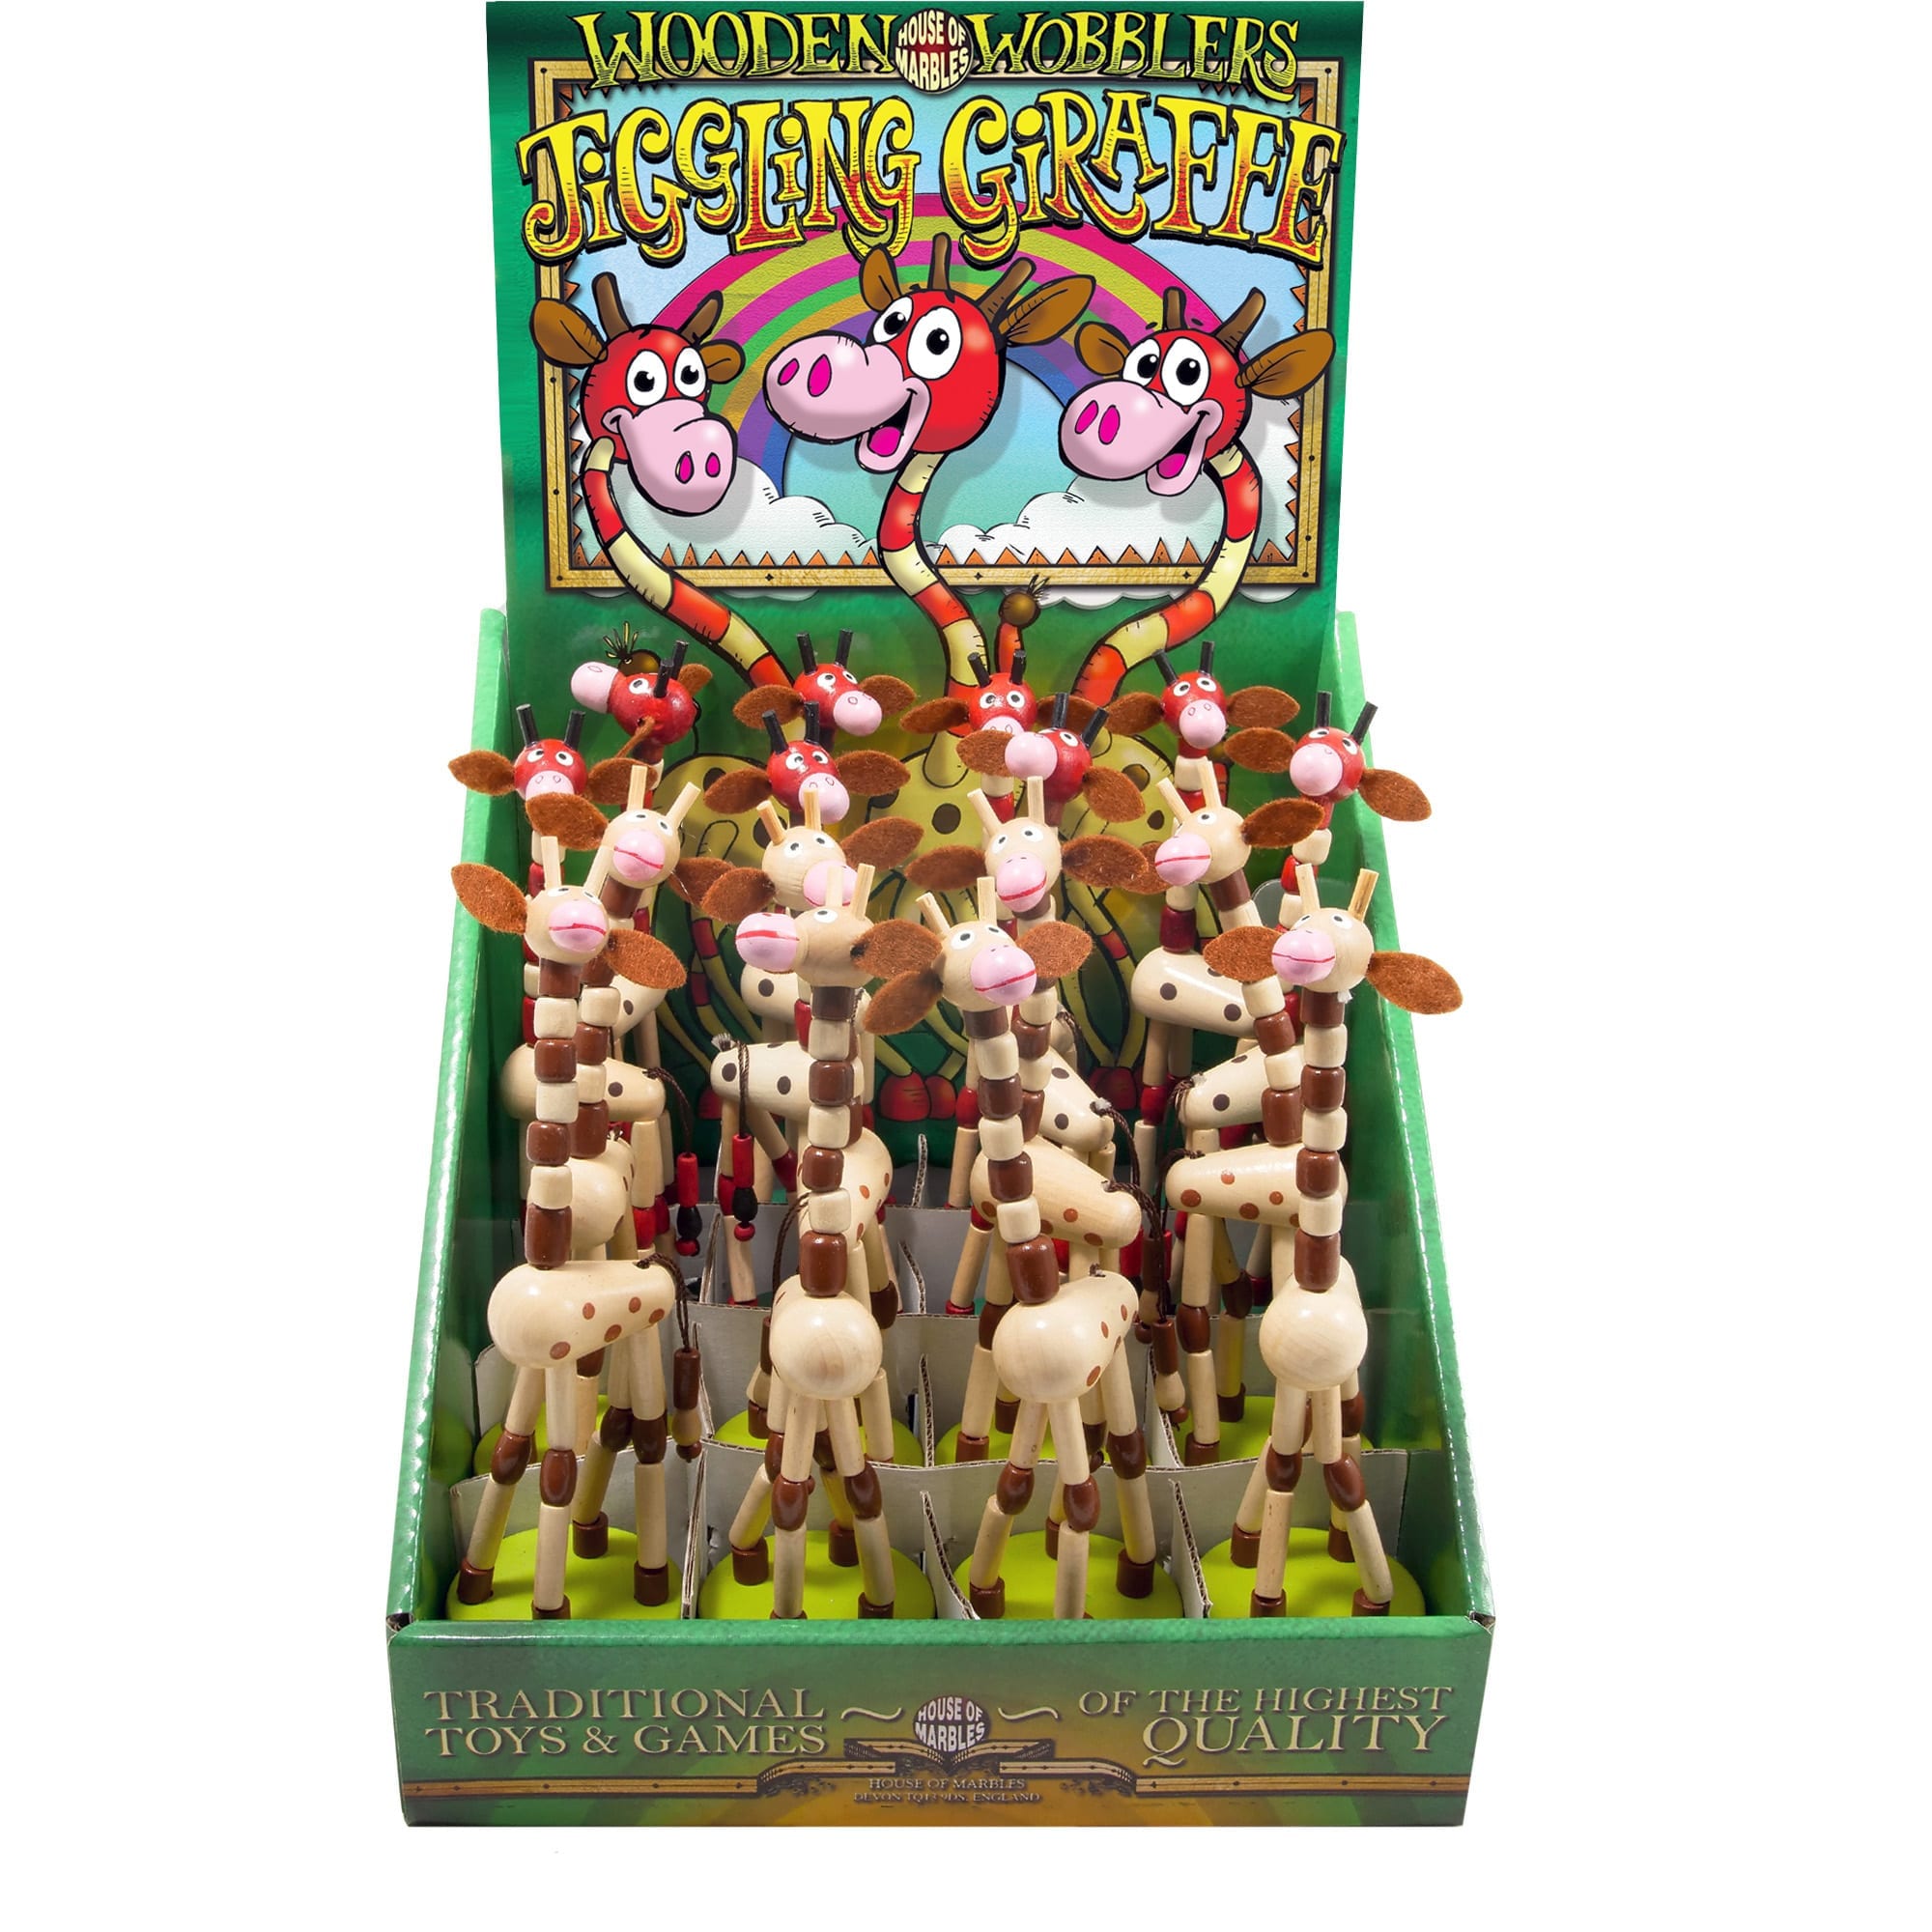 House Of Marbles Jiggling Giraffe Press-Up ( 1 pic)